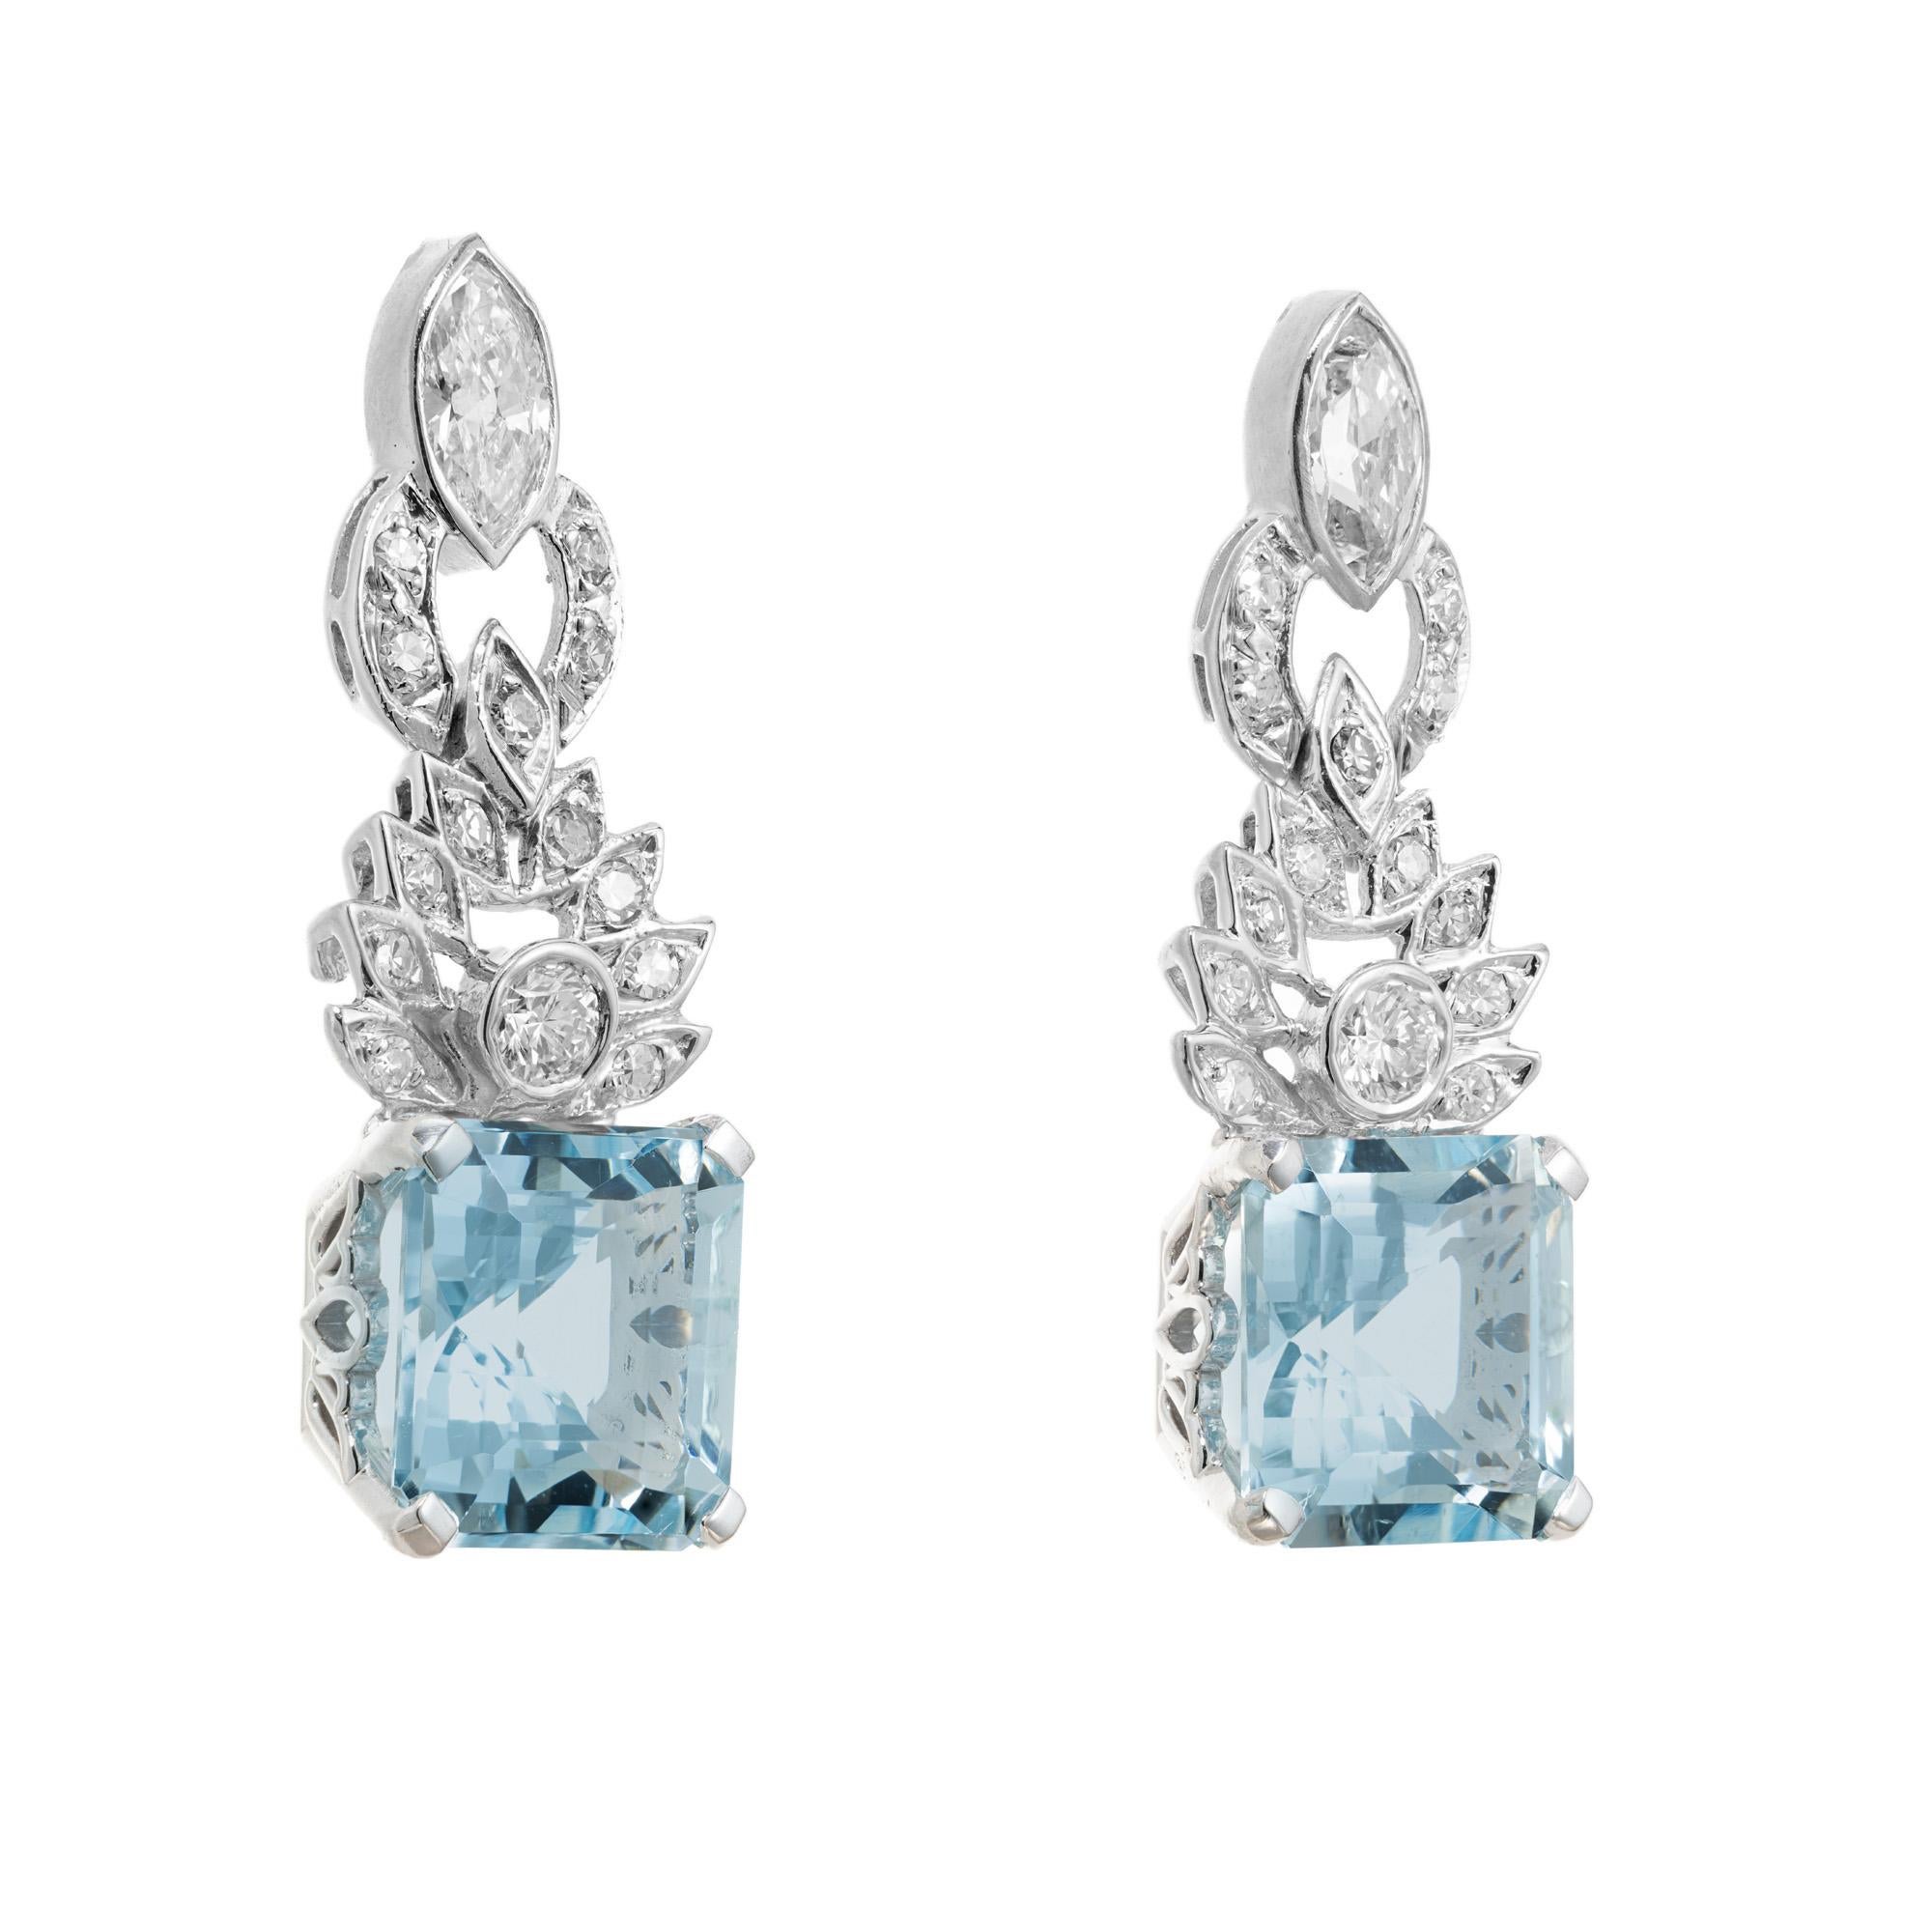 1950's Spectacular vintage mid-century aquamarine and diamond dangle earrings. 2 square cut aquamarine gemstones totaling 8.66cts set in platinum four prong settings. Accented with 1.32cts if marquise, round brilliant cut and single cut diamonds in